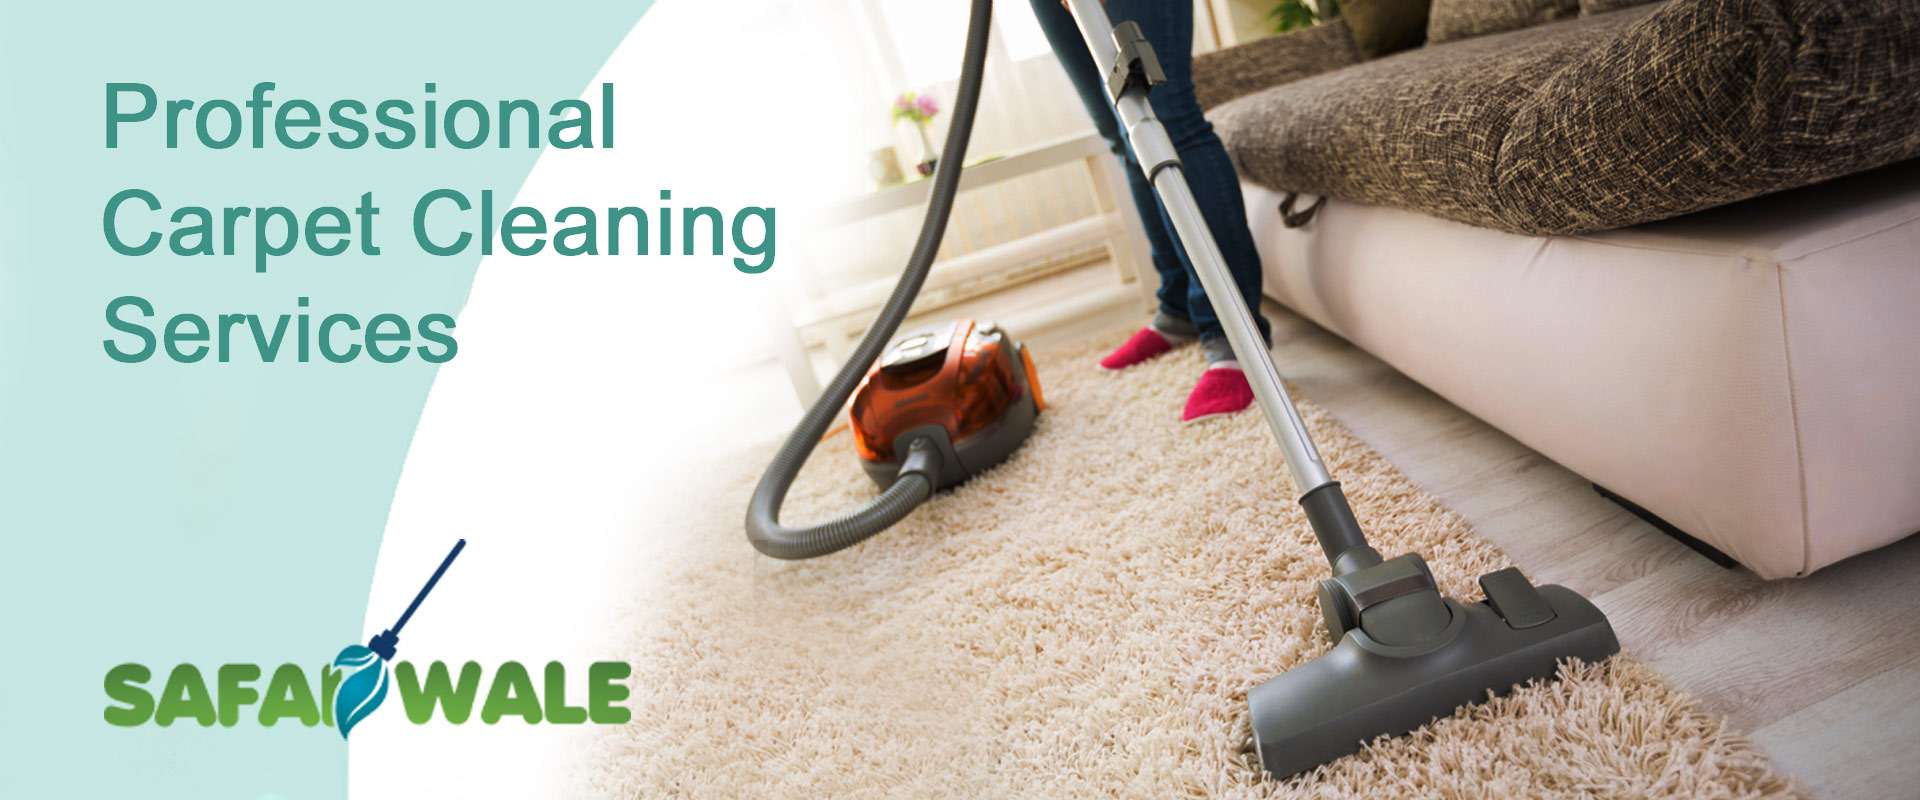 Carpet Cleaning Services In Panch Pakhadi, Thane